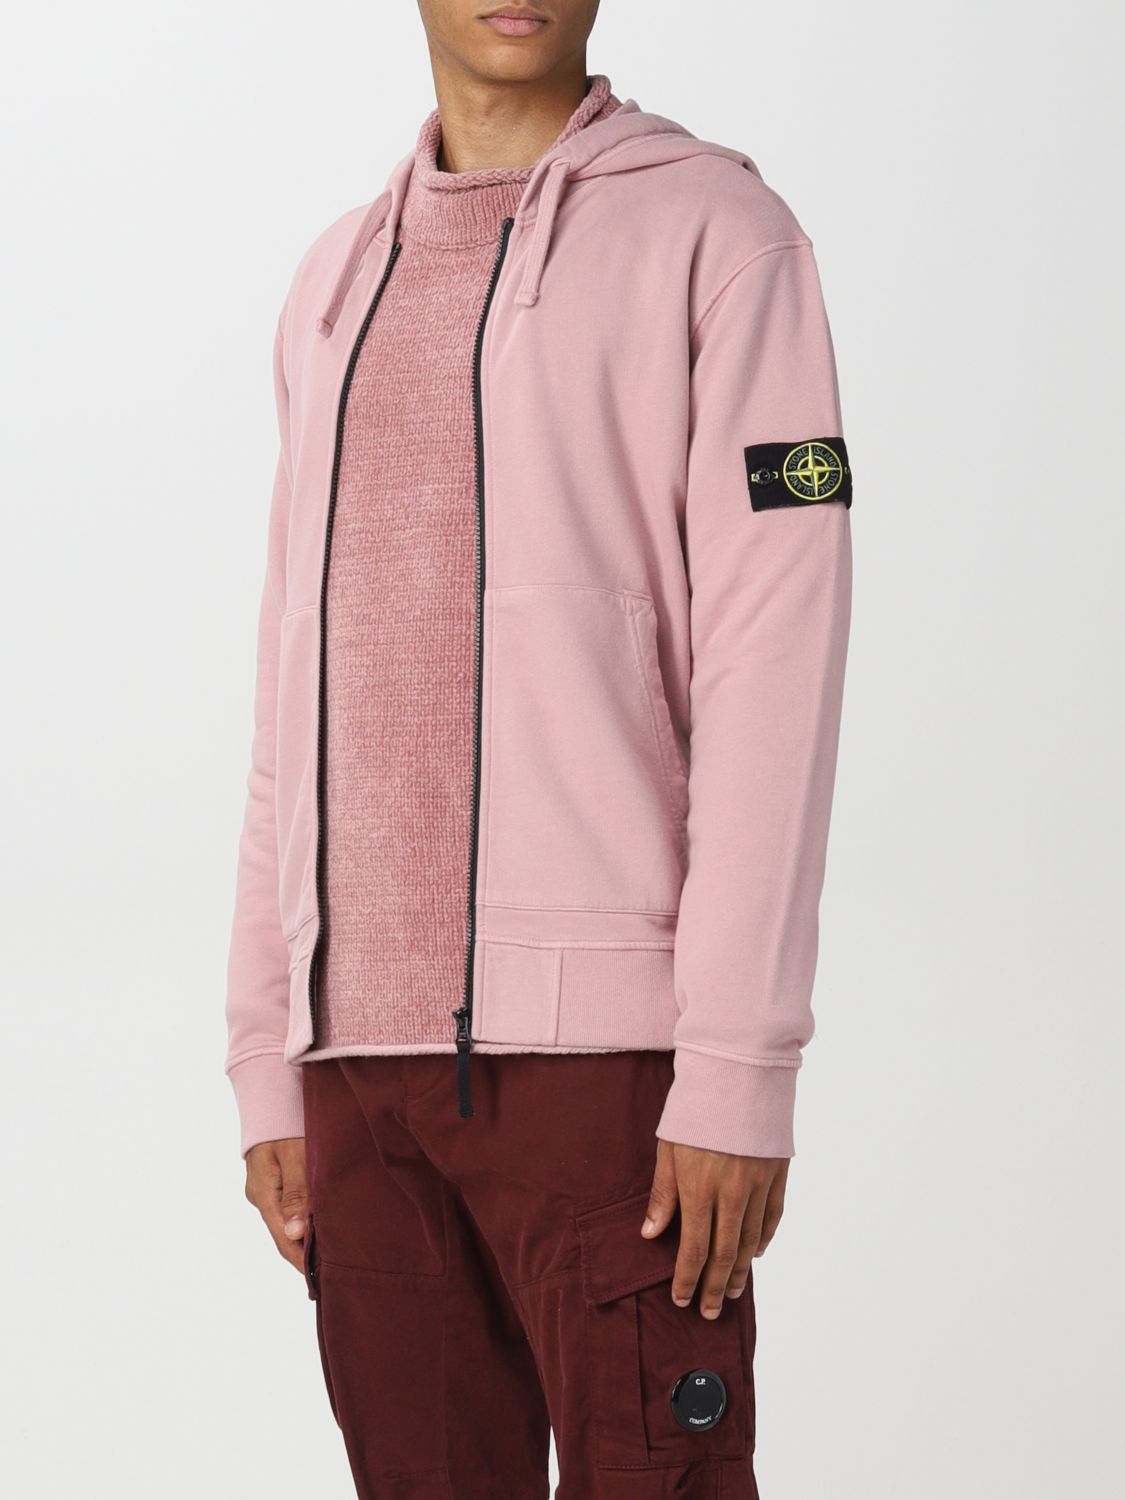 Sweatshirt Stone Island: Stone Island sweatshirt for man pink 3